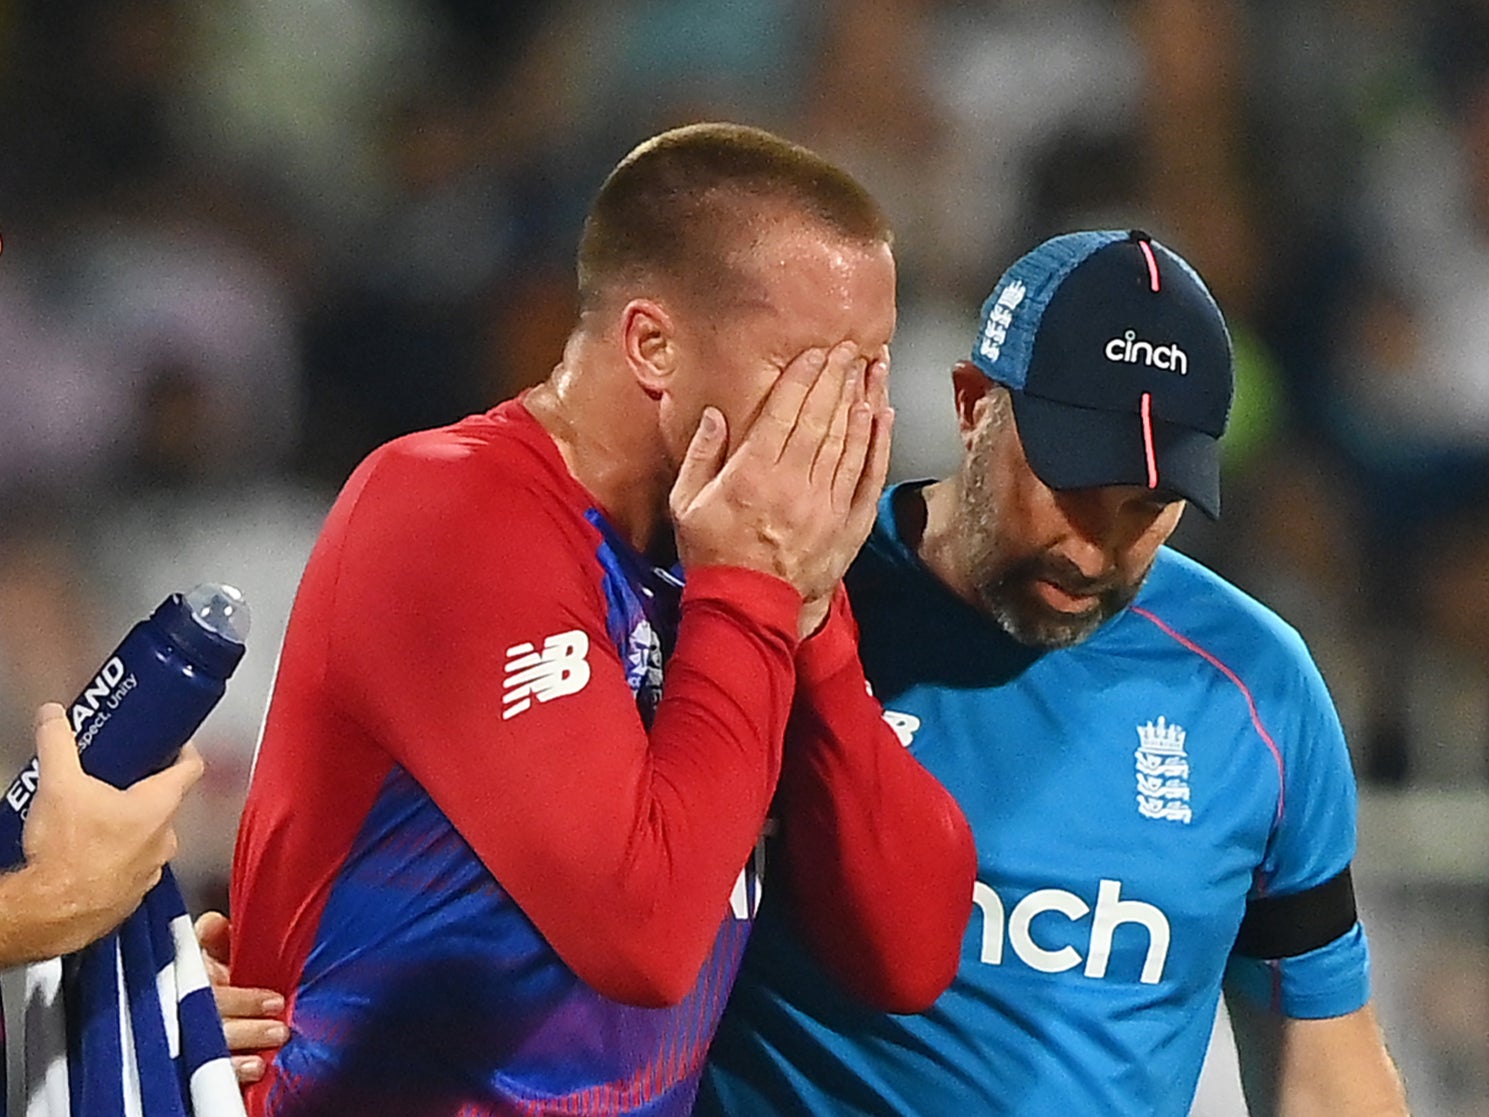 Jason Roy will miss the rest of the T20 World Cup